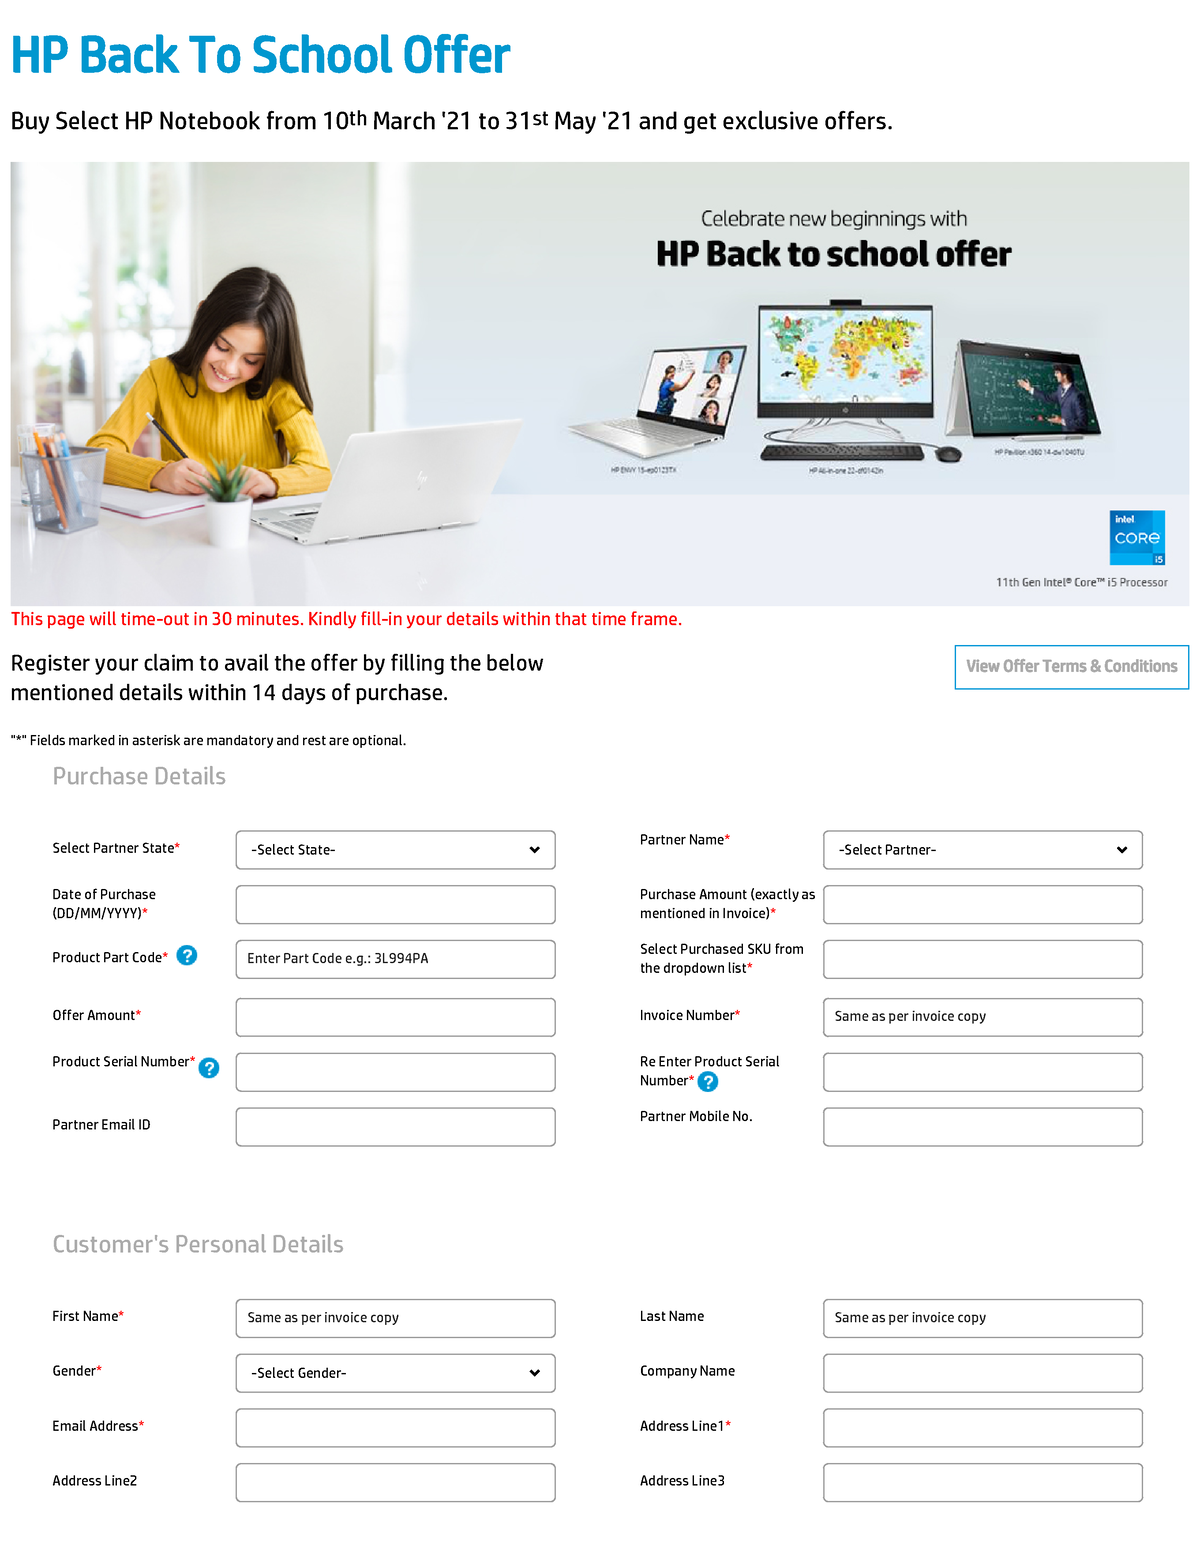 HP Back To School Offer good Register your claim to avail the offer